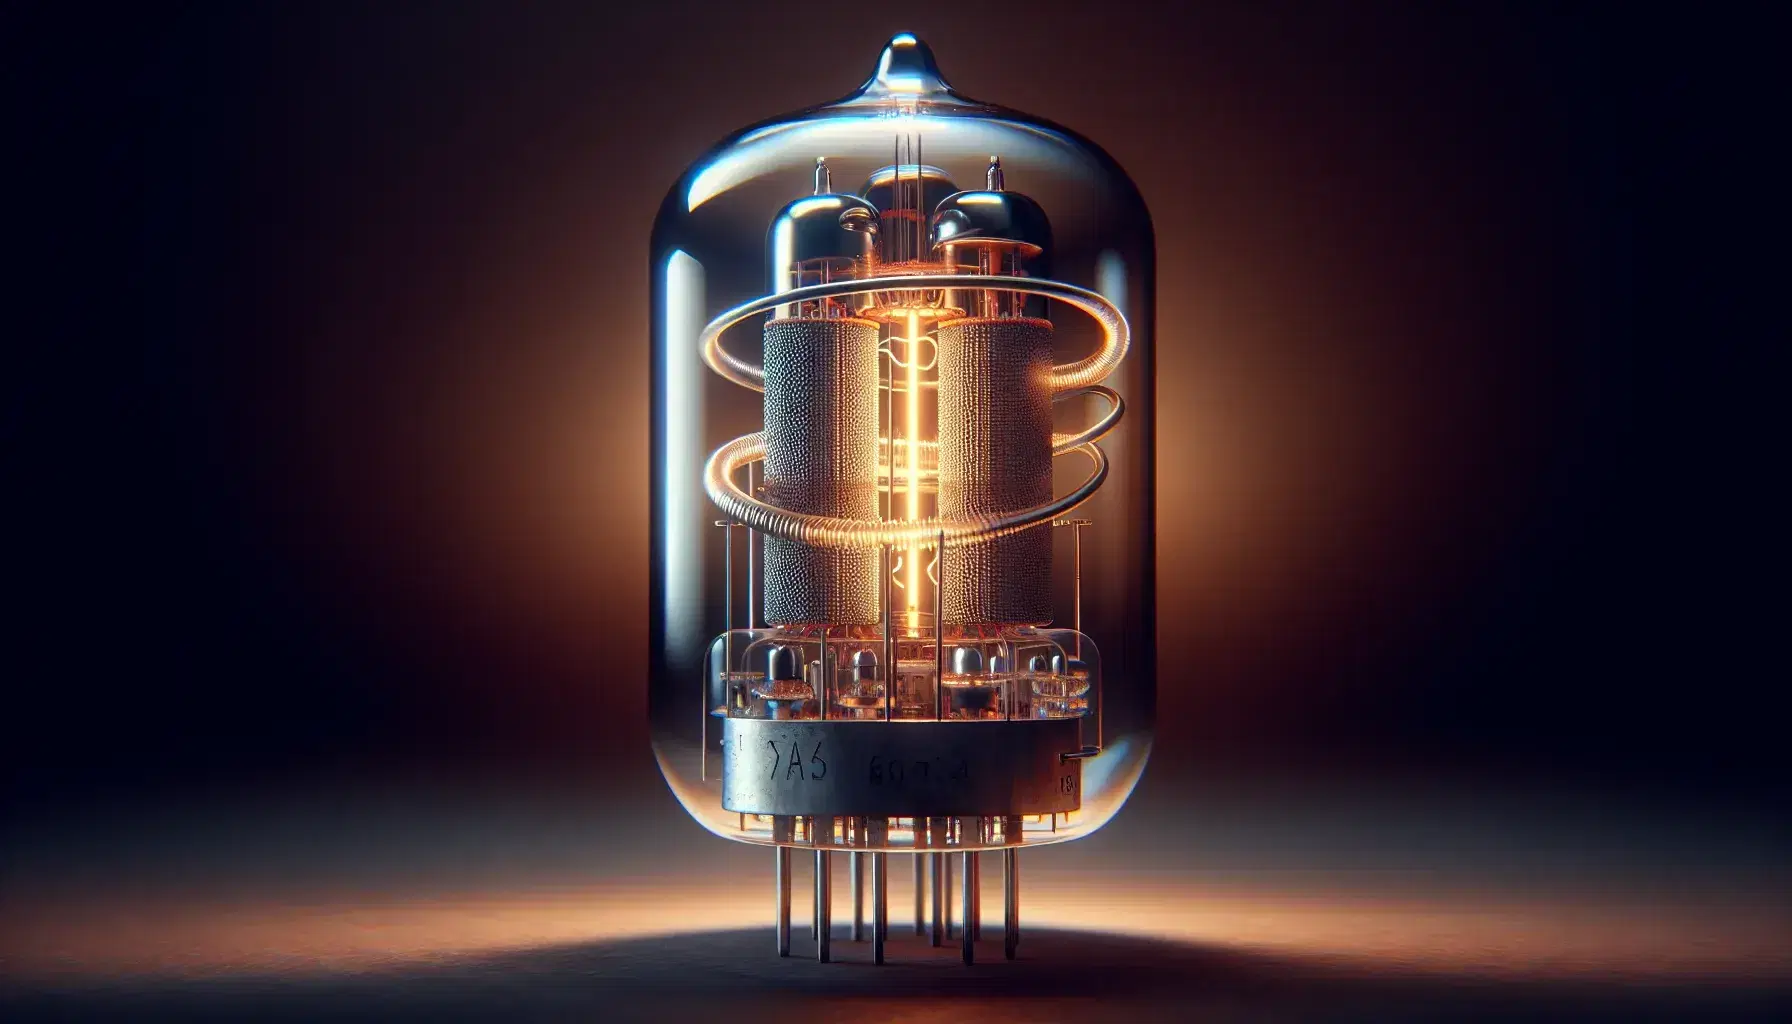 Close-up view of a thermionic diode vacuum tube with a glowing filament, showcasing internal metallic cathode and reflective anode.